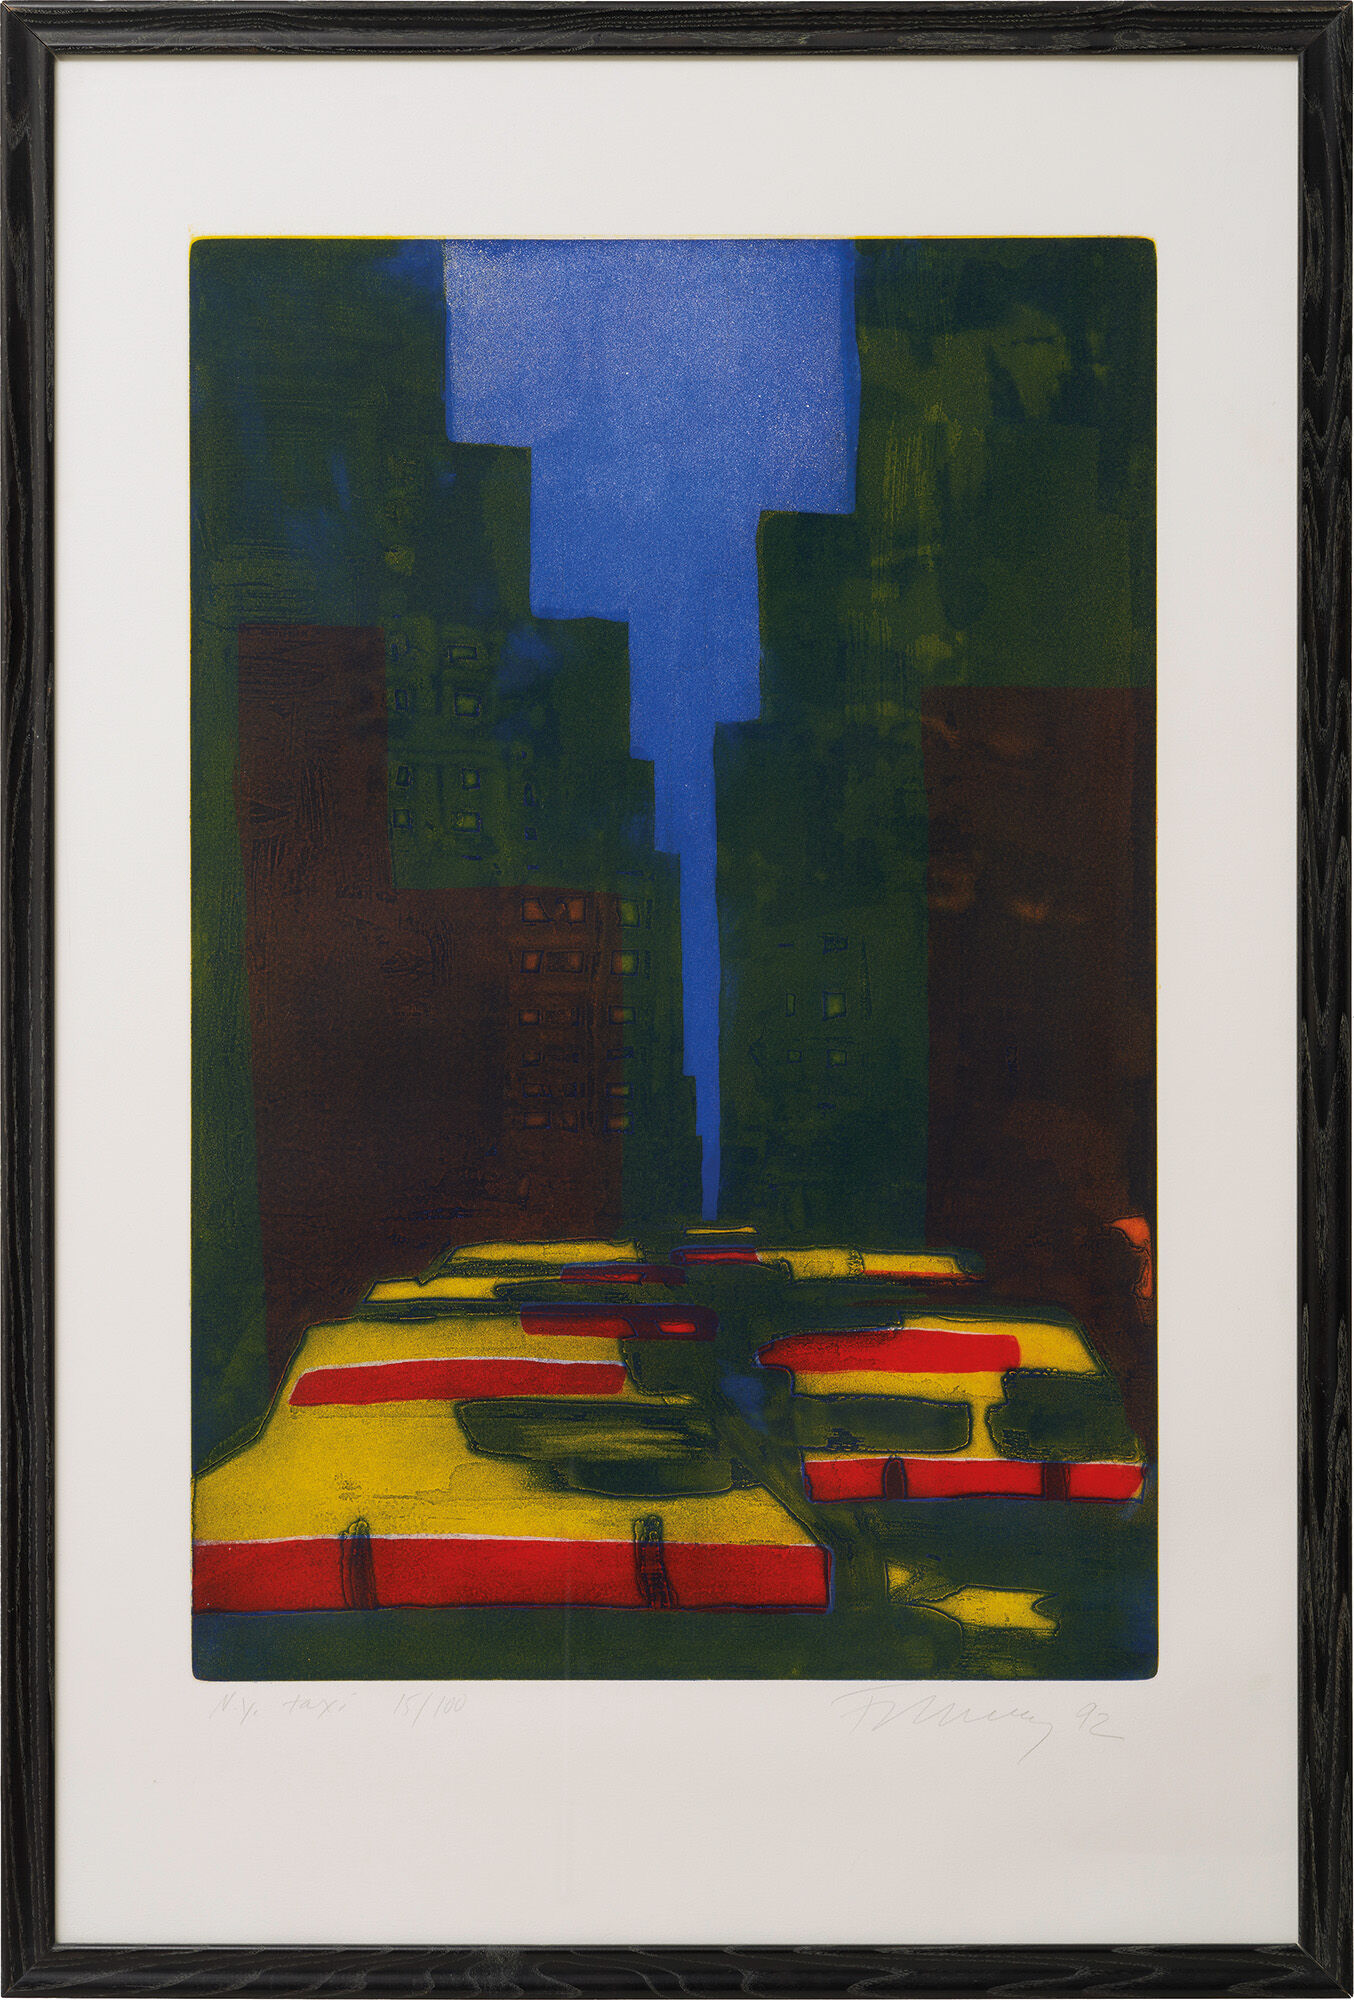 Picture "N.Y. Taxi" (1992) by Rainer Fetting